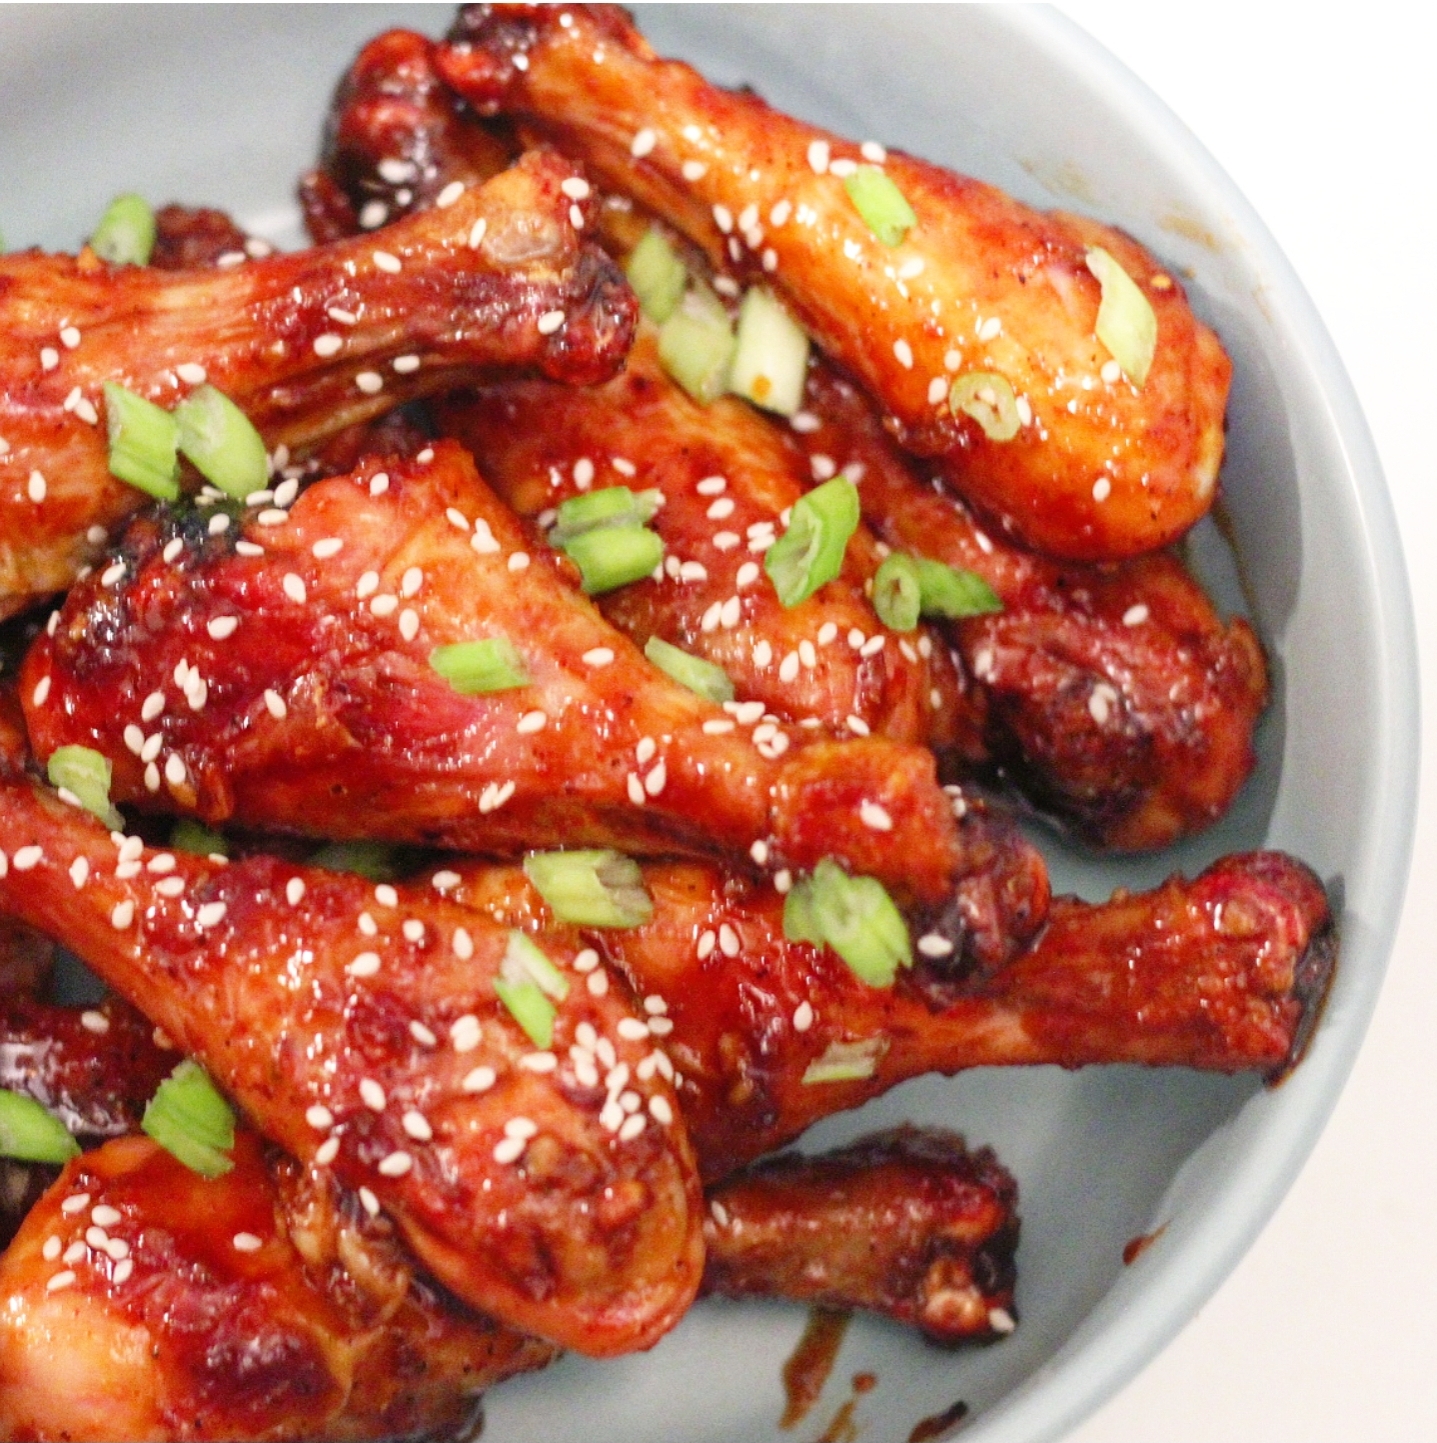 From My Kitchen: Korean Wings